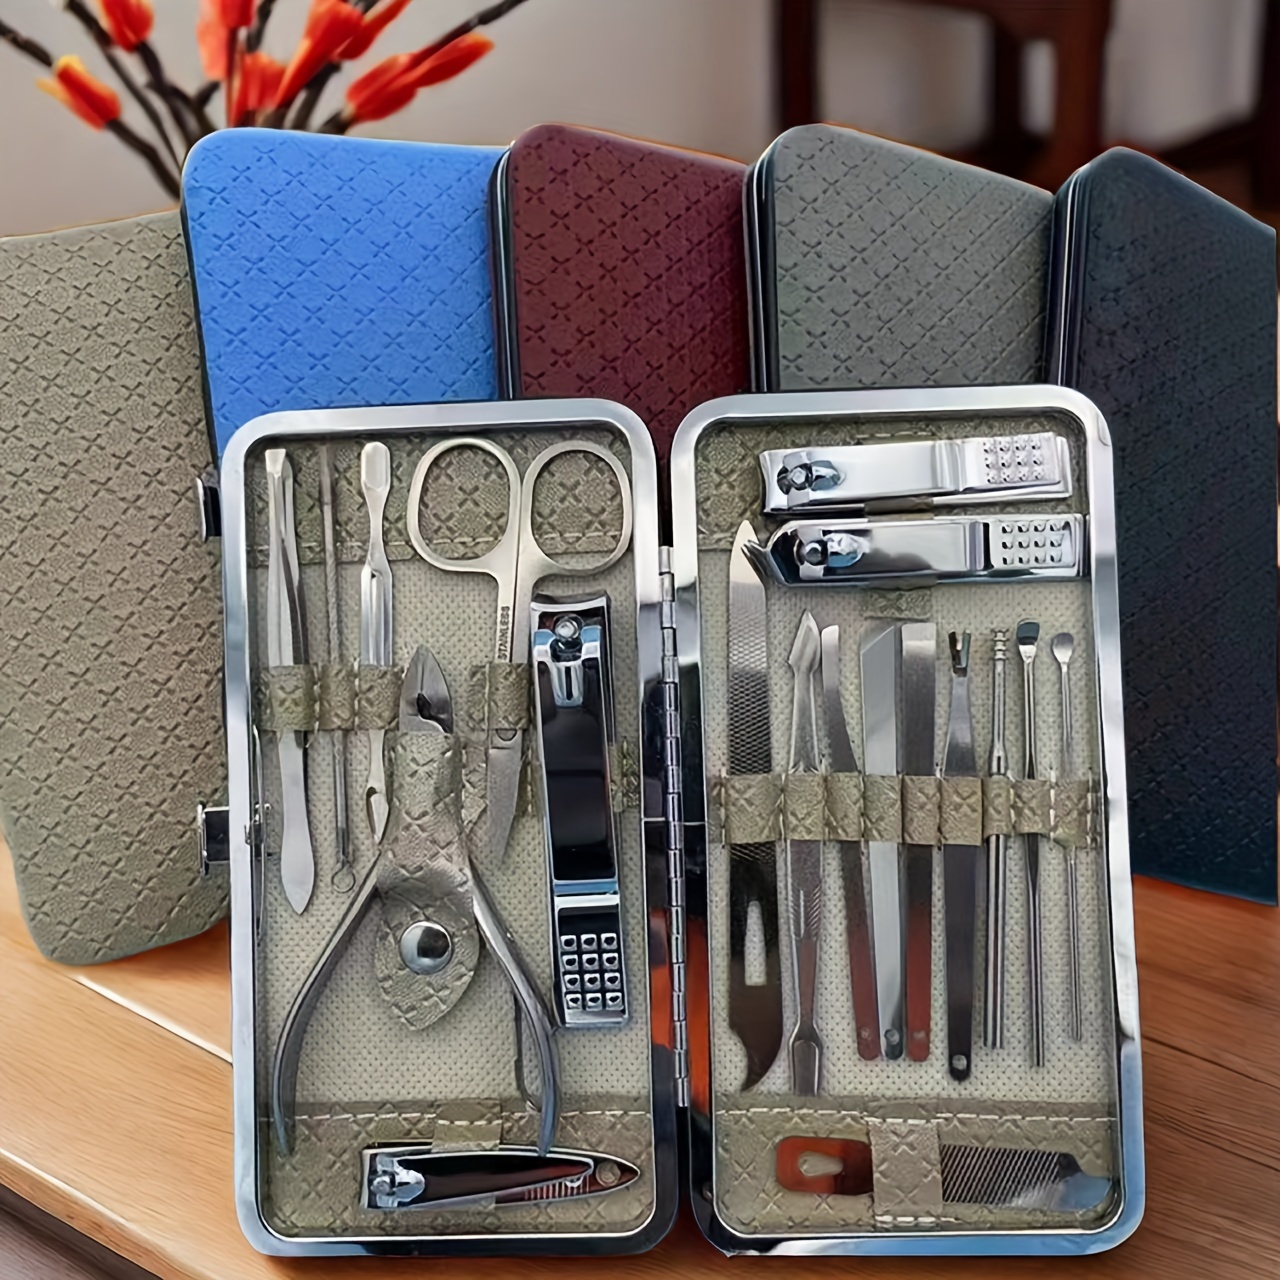 

19 Pcs/set Complete Manicure Pedicure Set, Nail Clipper, Files & More Perfect For Home Travel